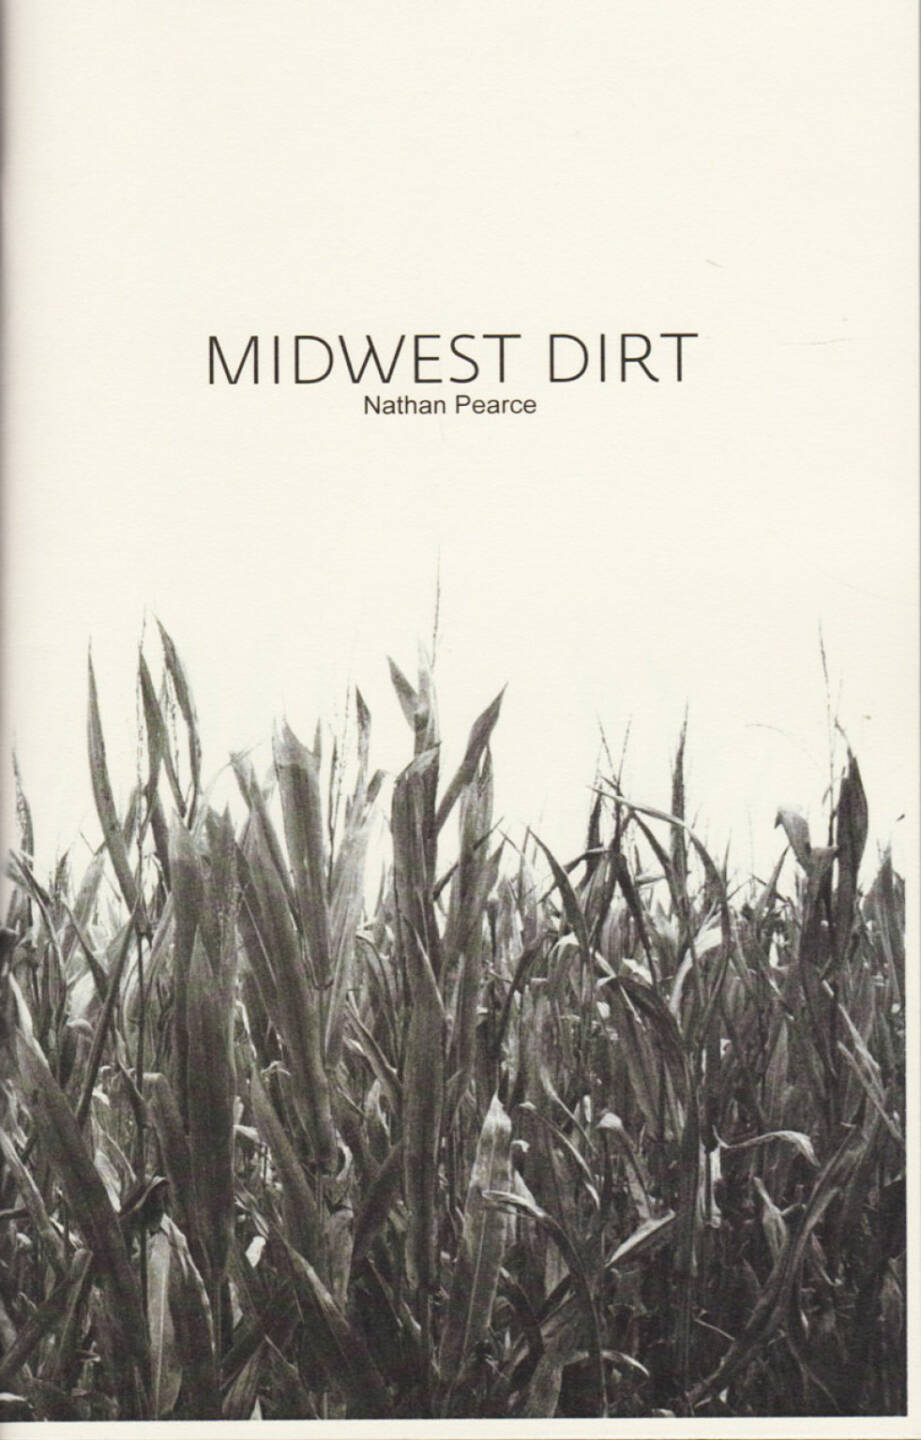 Nathan Pearce - Midwest Dirt (Bootleg Edition), Same Coin Press / Self published 2015, Cover - http://josefchladek.com/book/nathan_pearce_-_midwest_dirt_bootleg_edition